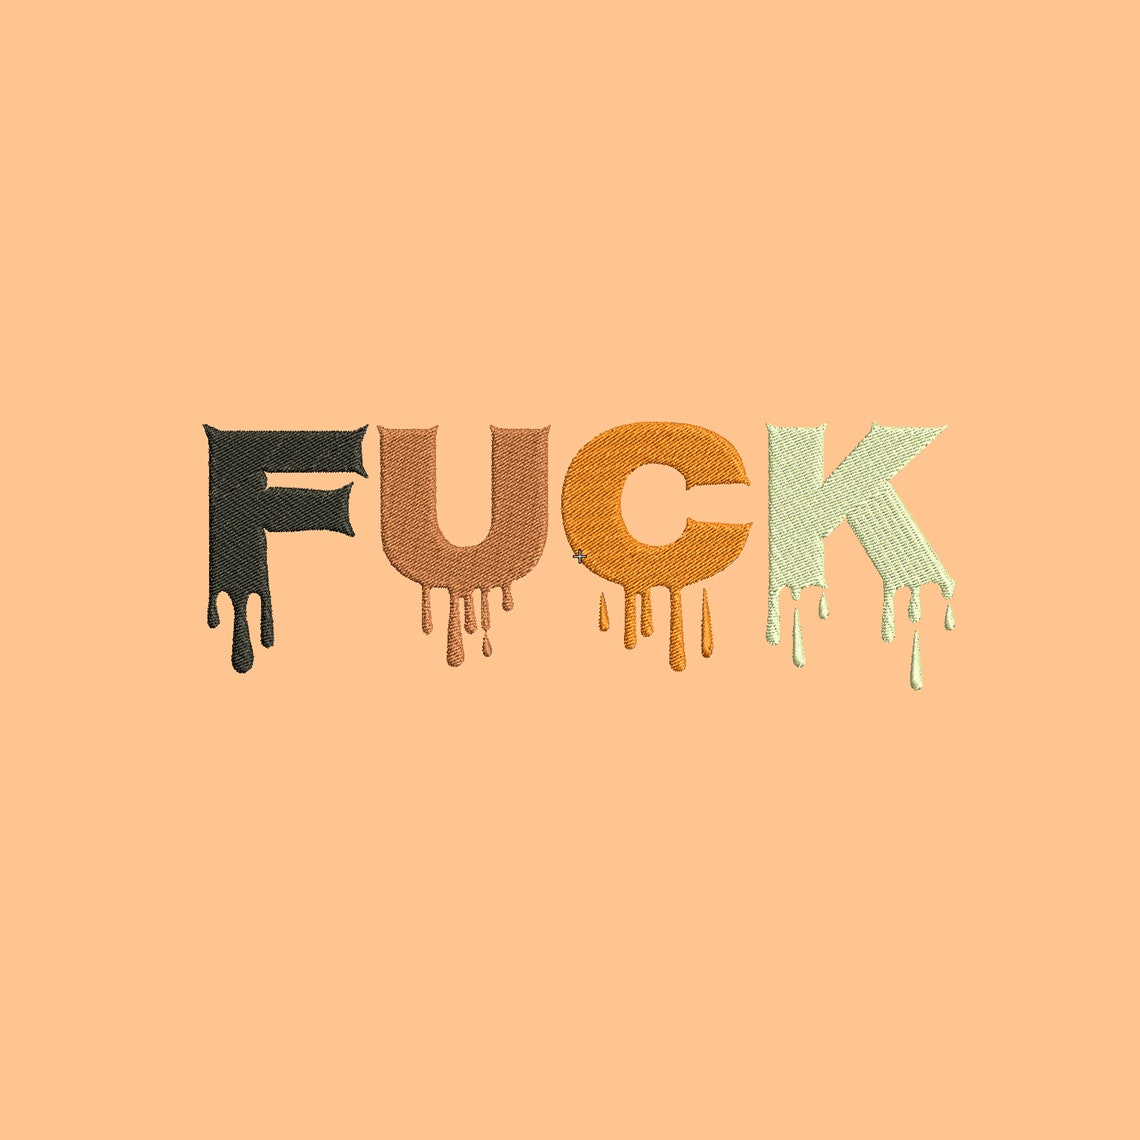 Fuck You Embroidery Design Fack With Drips Embroidery Design Etsy